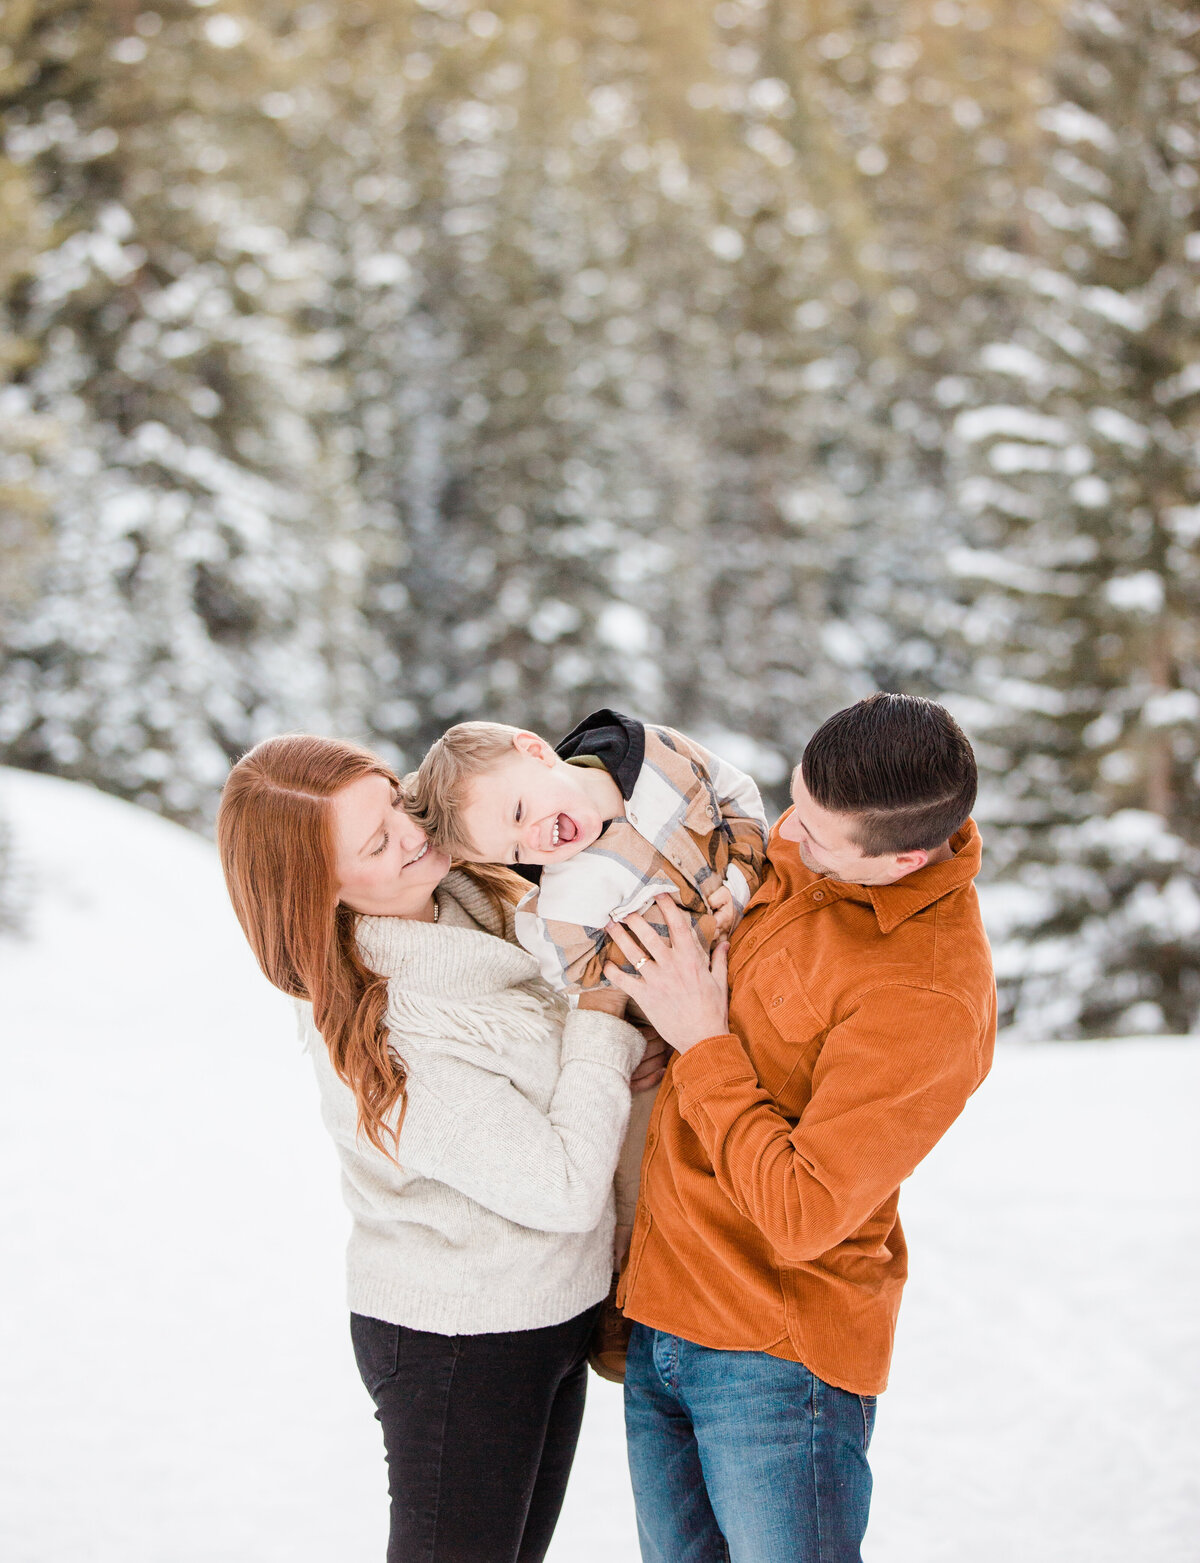 Parents have their young son in their arms and are tickling him playfully. There is a scene of snow covered pine trees behind then